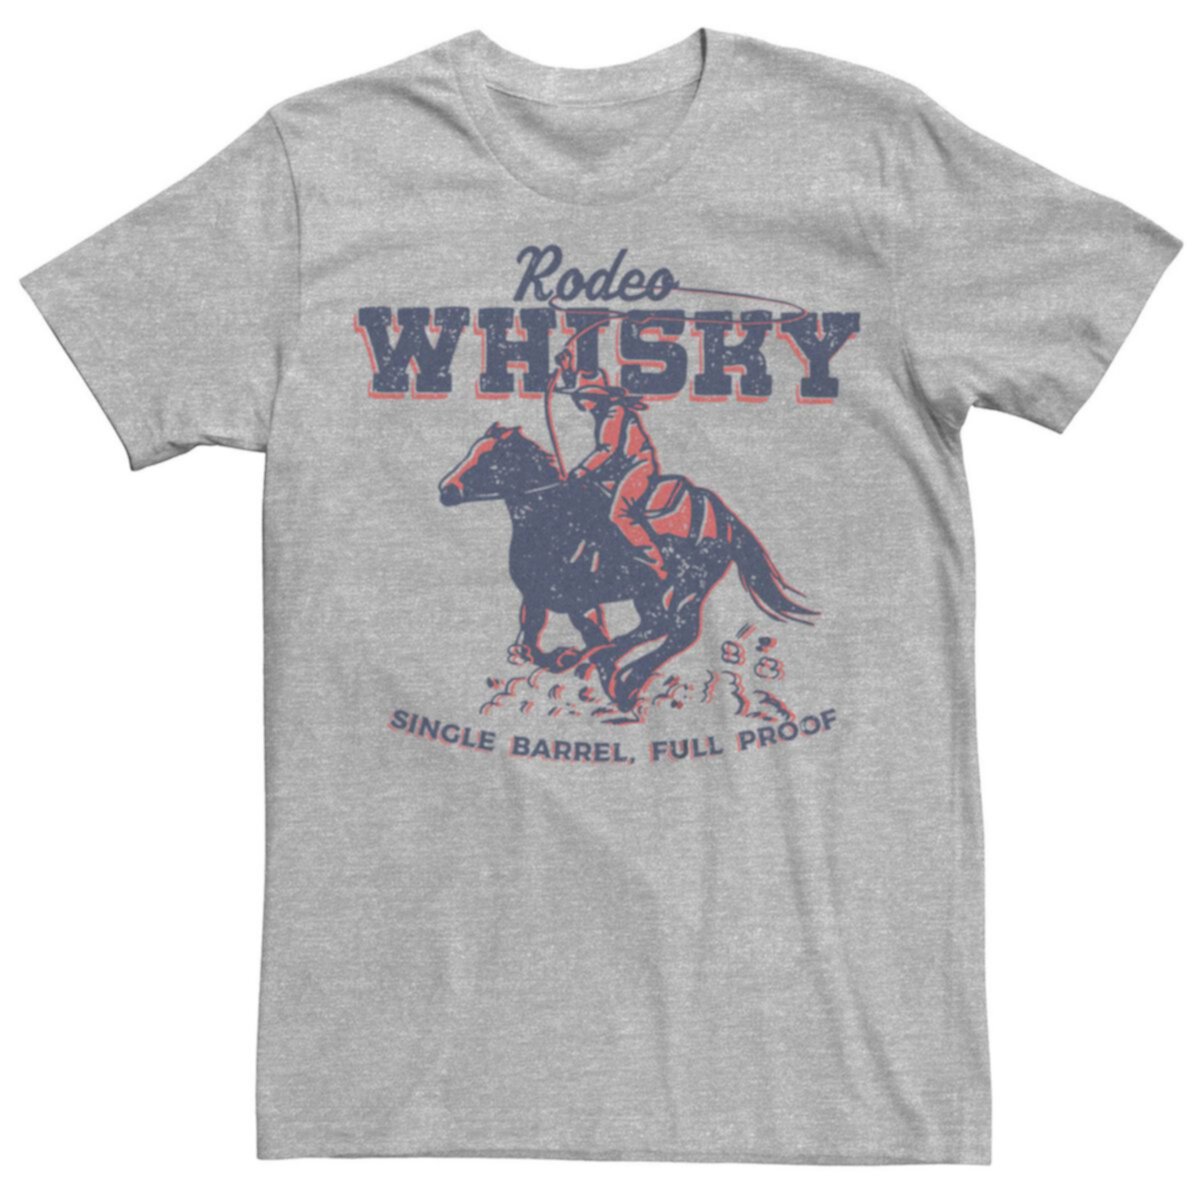 Men's Rodeo Whisky Single Barrel Full Proof Cowboy Graphic Tee Generic